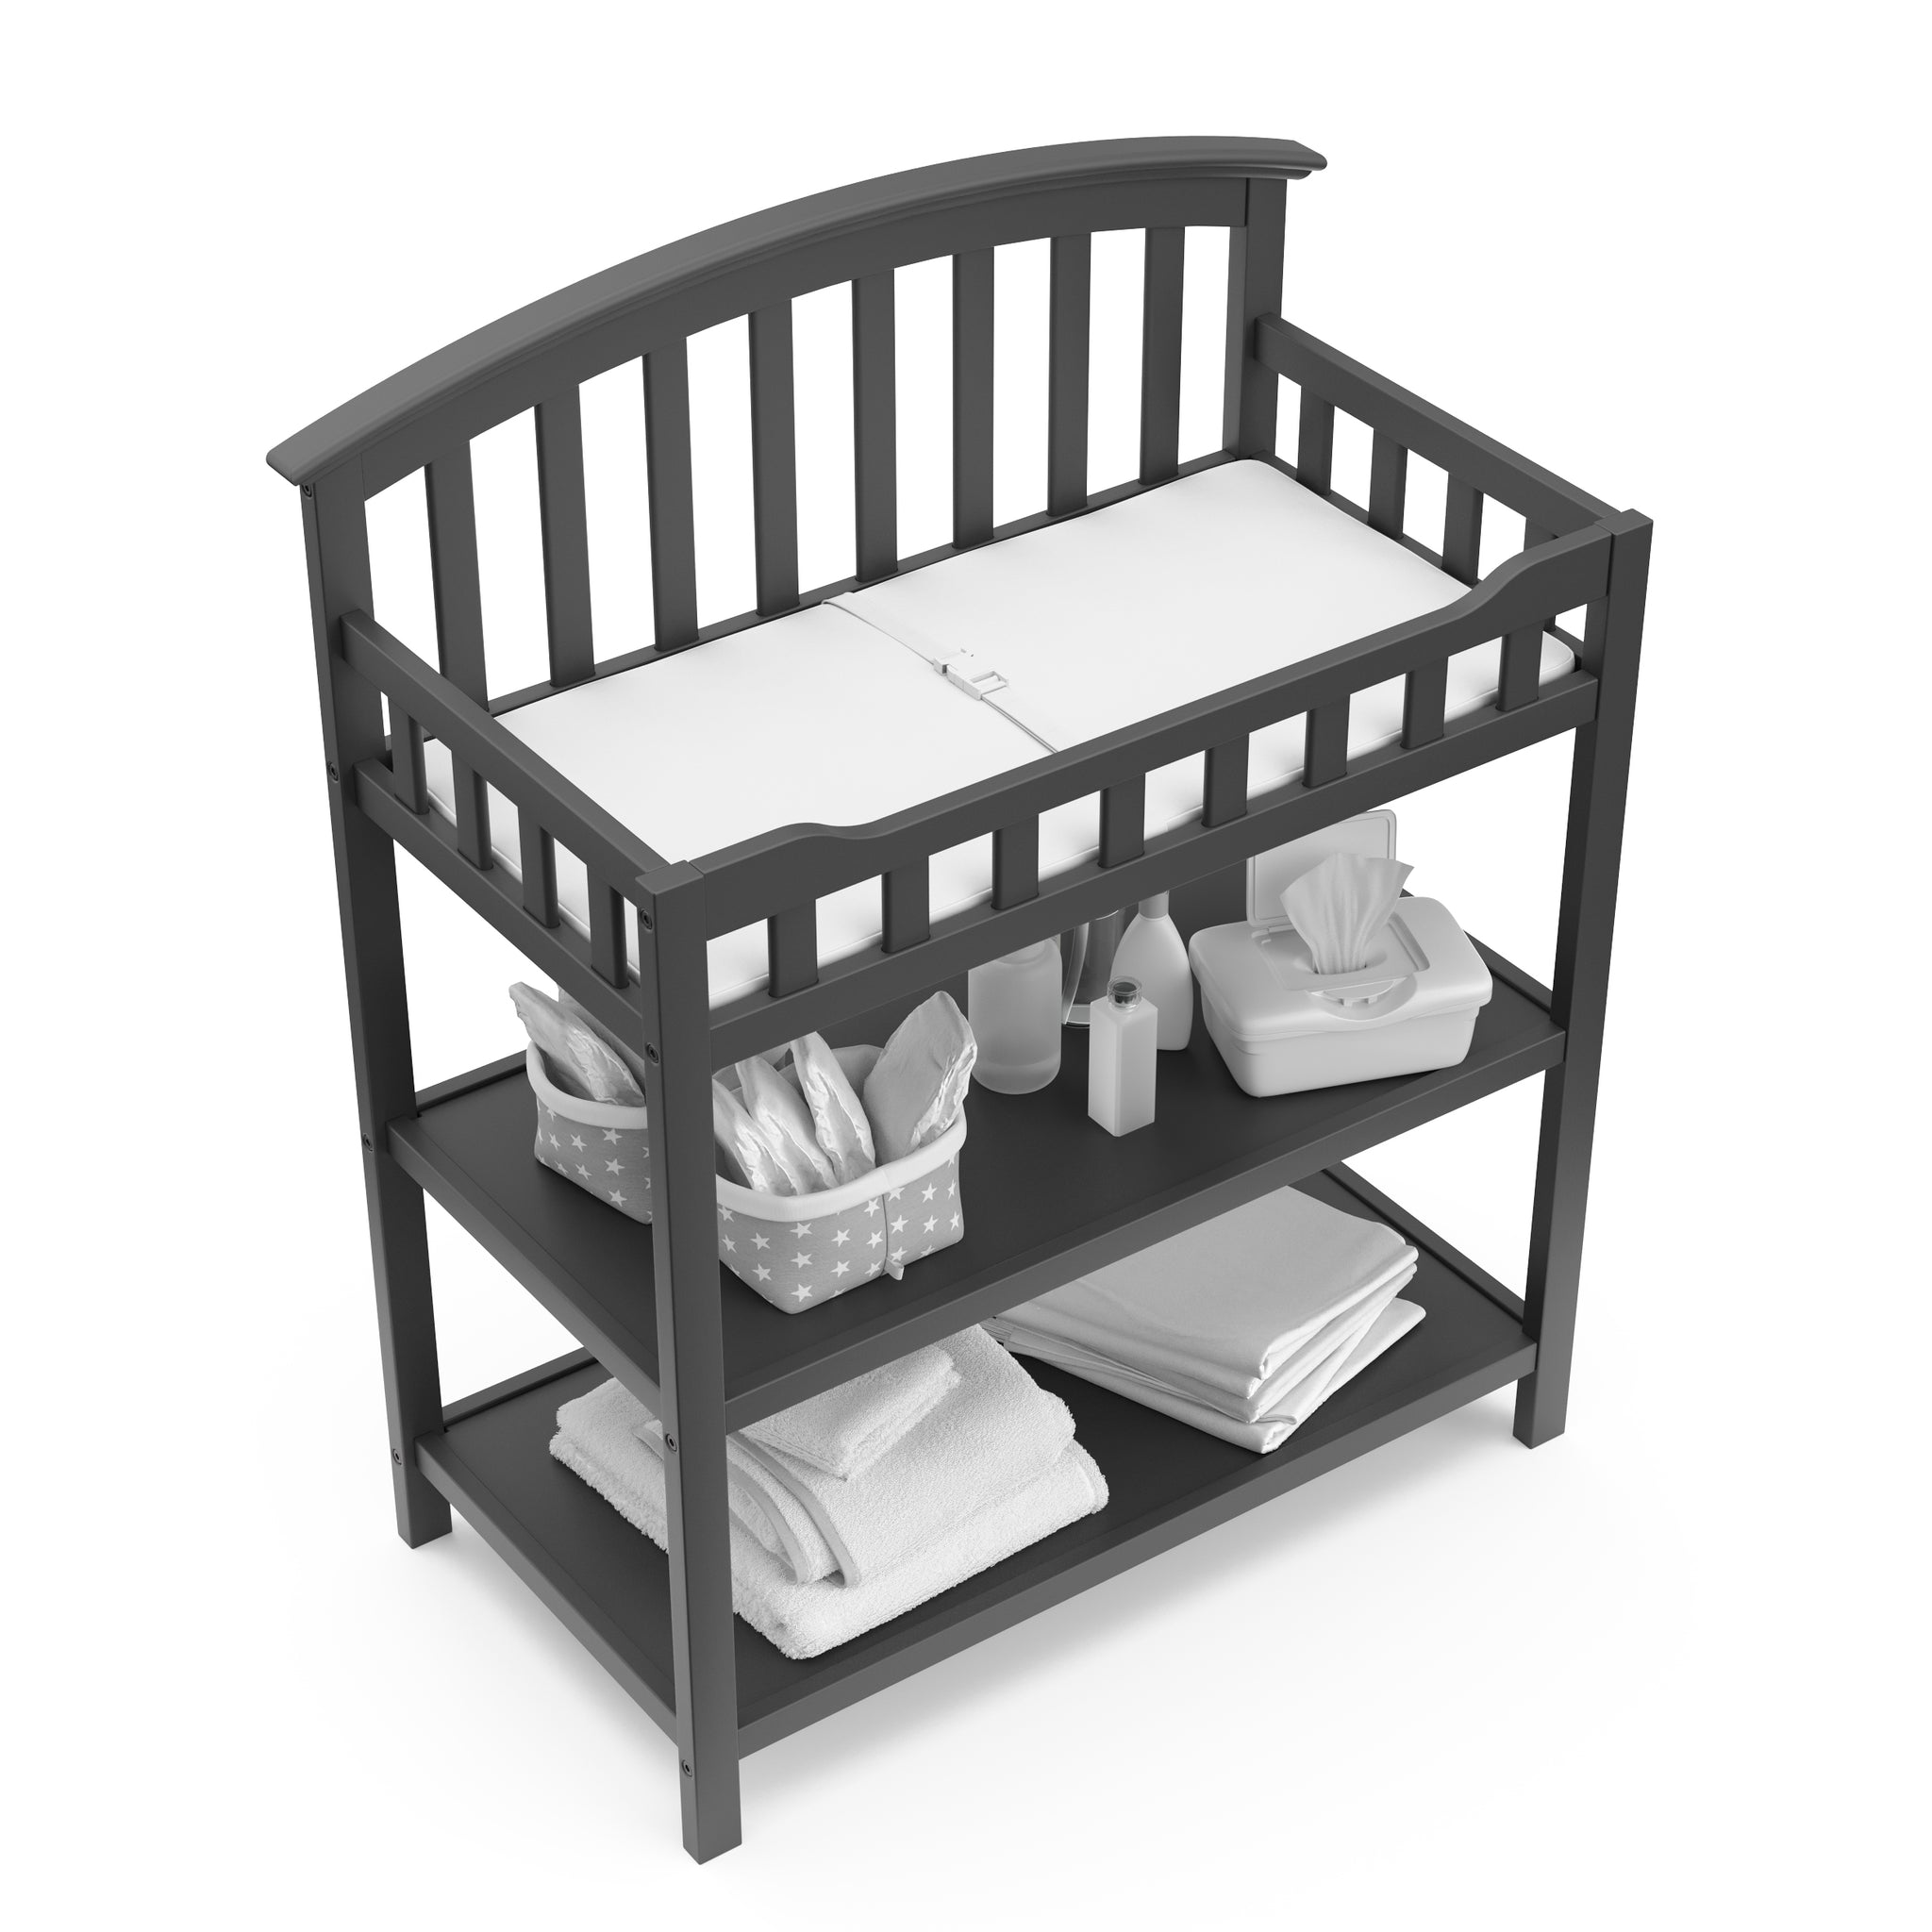 Bird’s-eye view of gray changing table with two open shelves